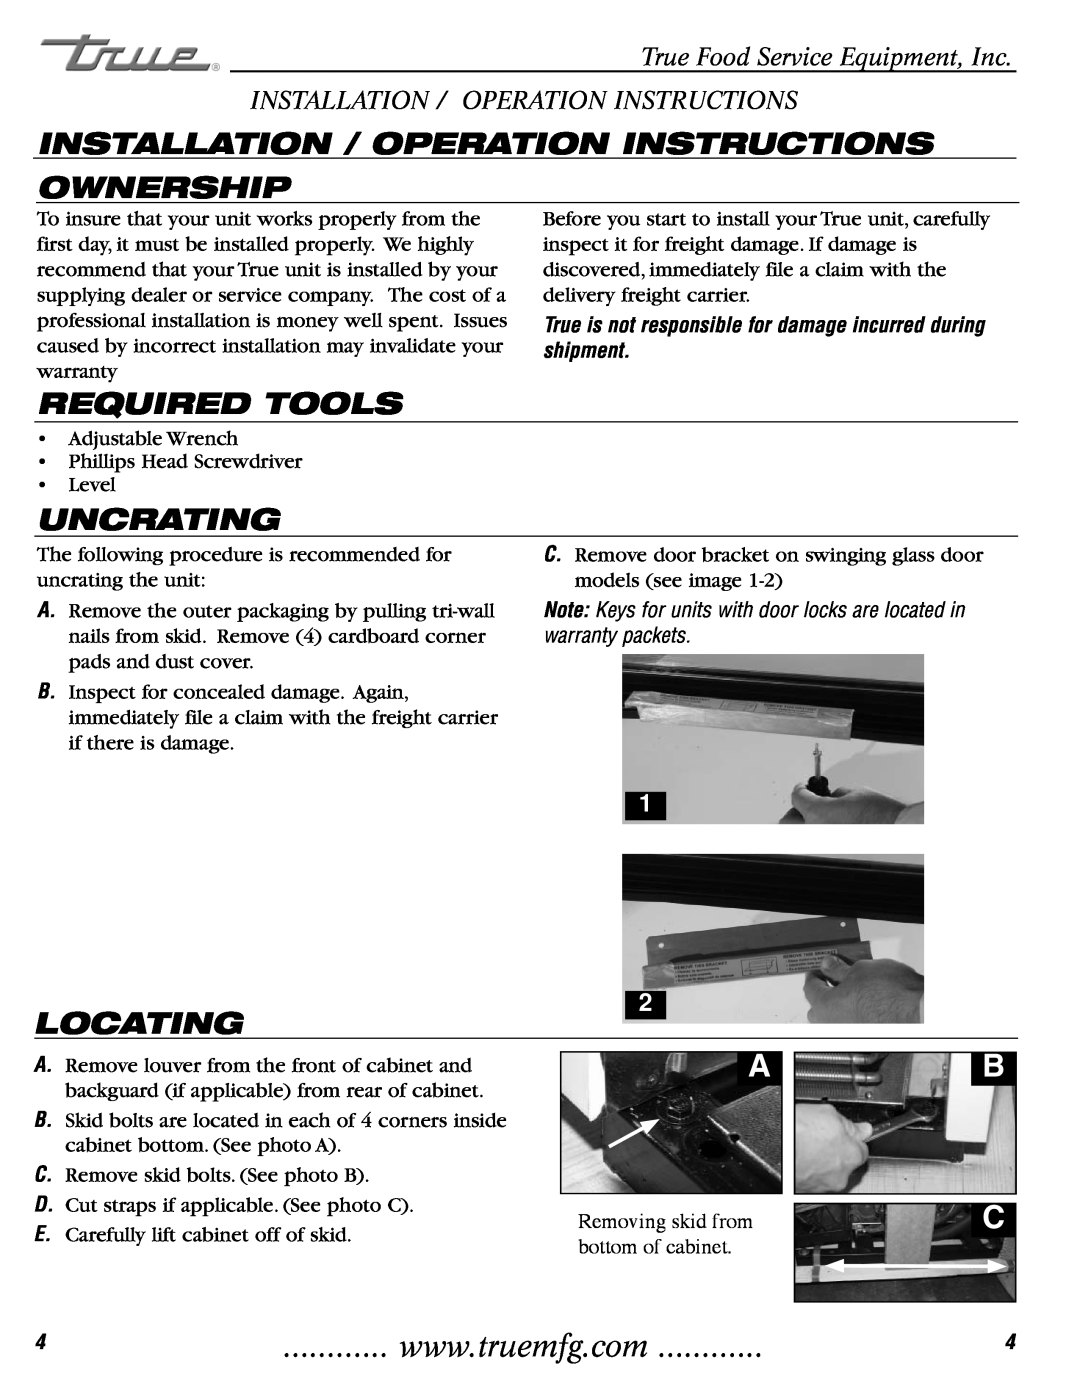 True Manufacturing Company TH-23 Installation / Operation Instructions Ownership, Required Tools, Uncrating, Locating 